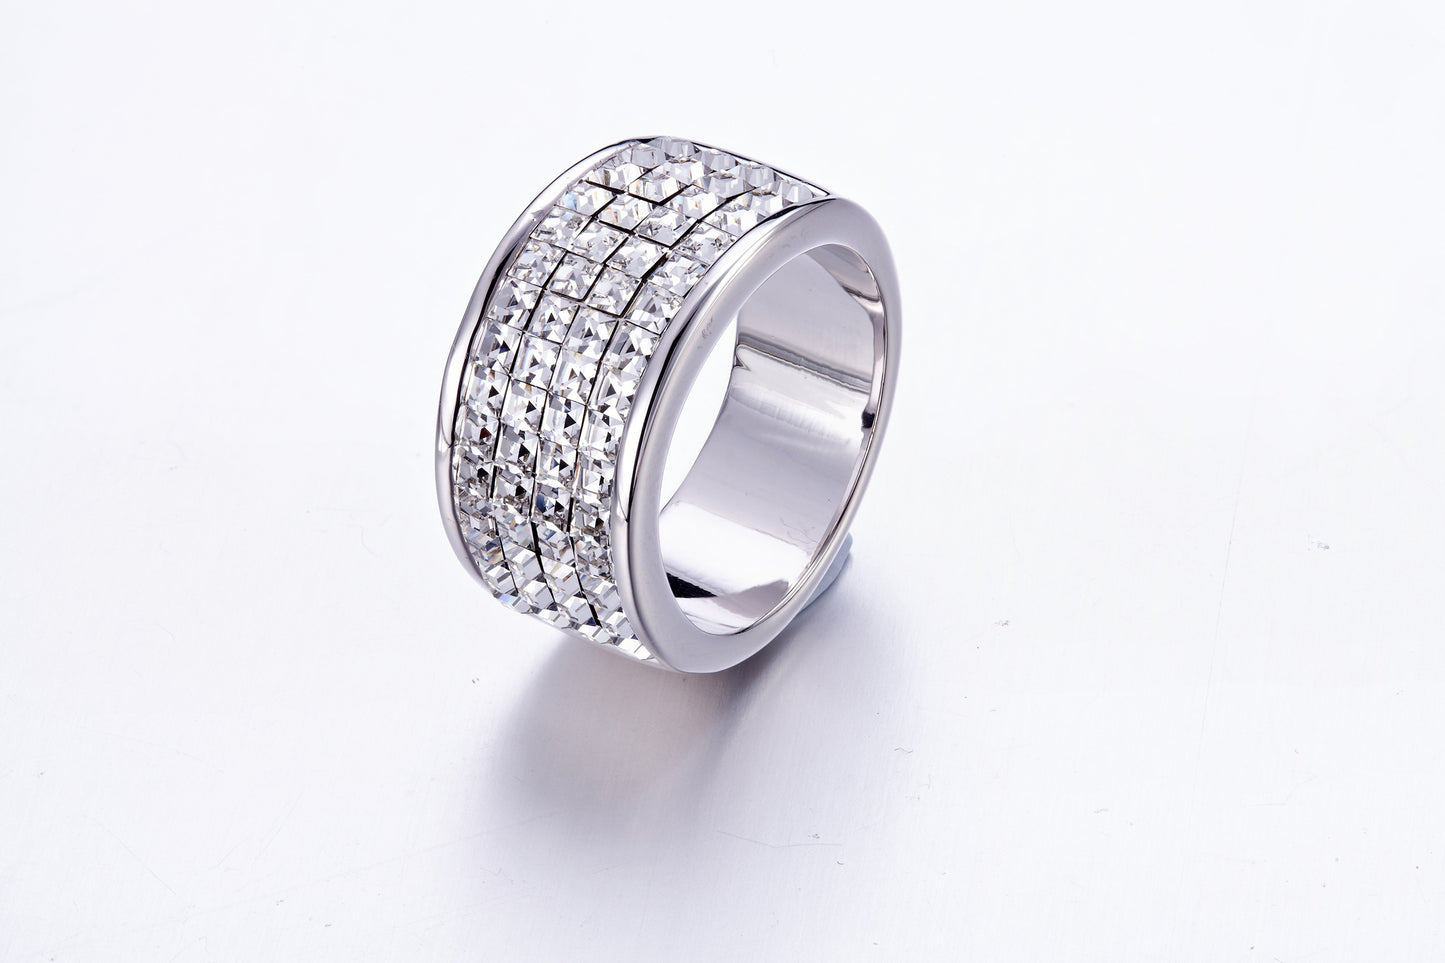 The circle cut little crystals ring - CDE Jewelry Egypt